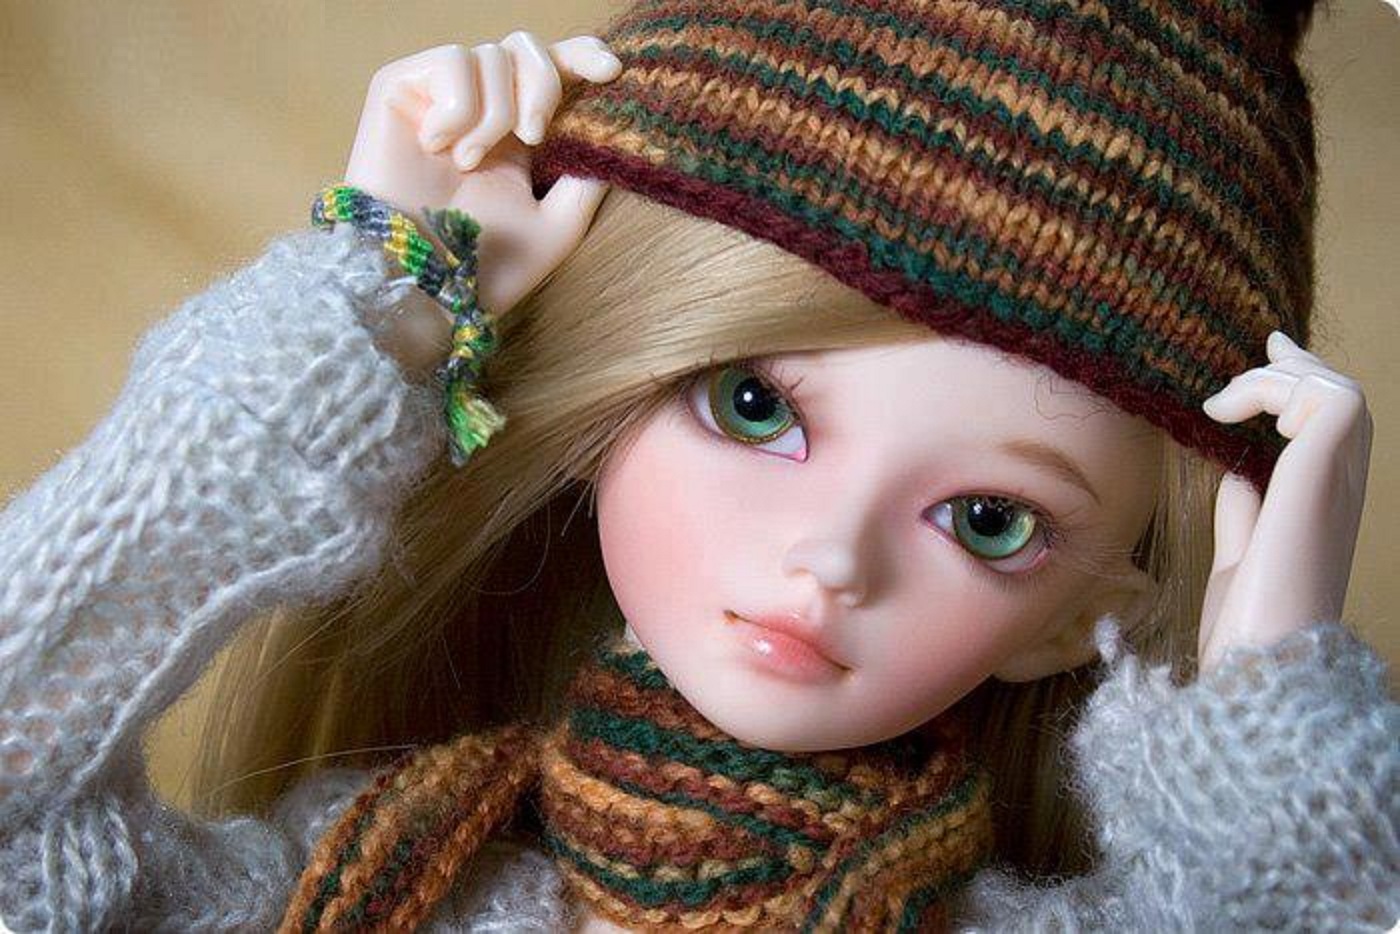 baby doll wallpaper free download,face,clothing,wool,skin,doll